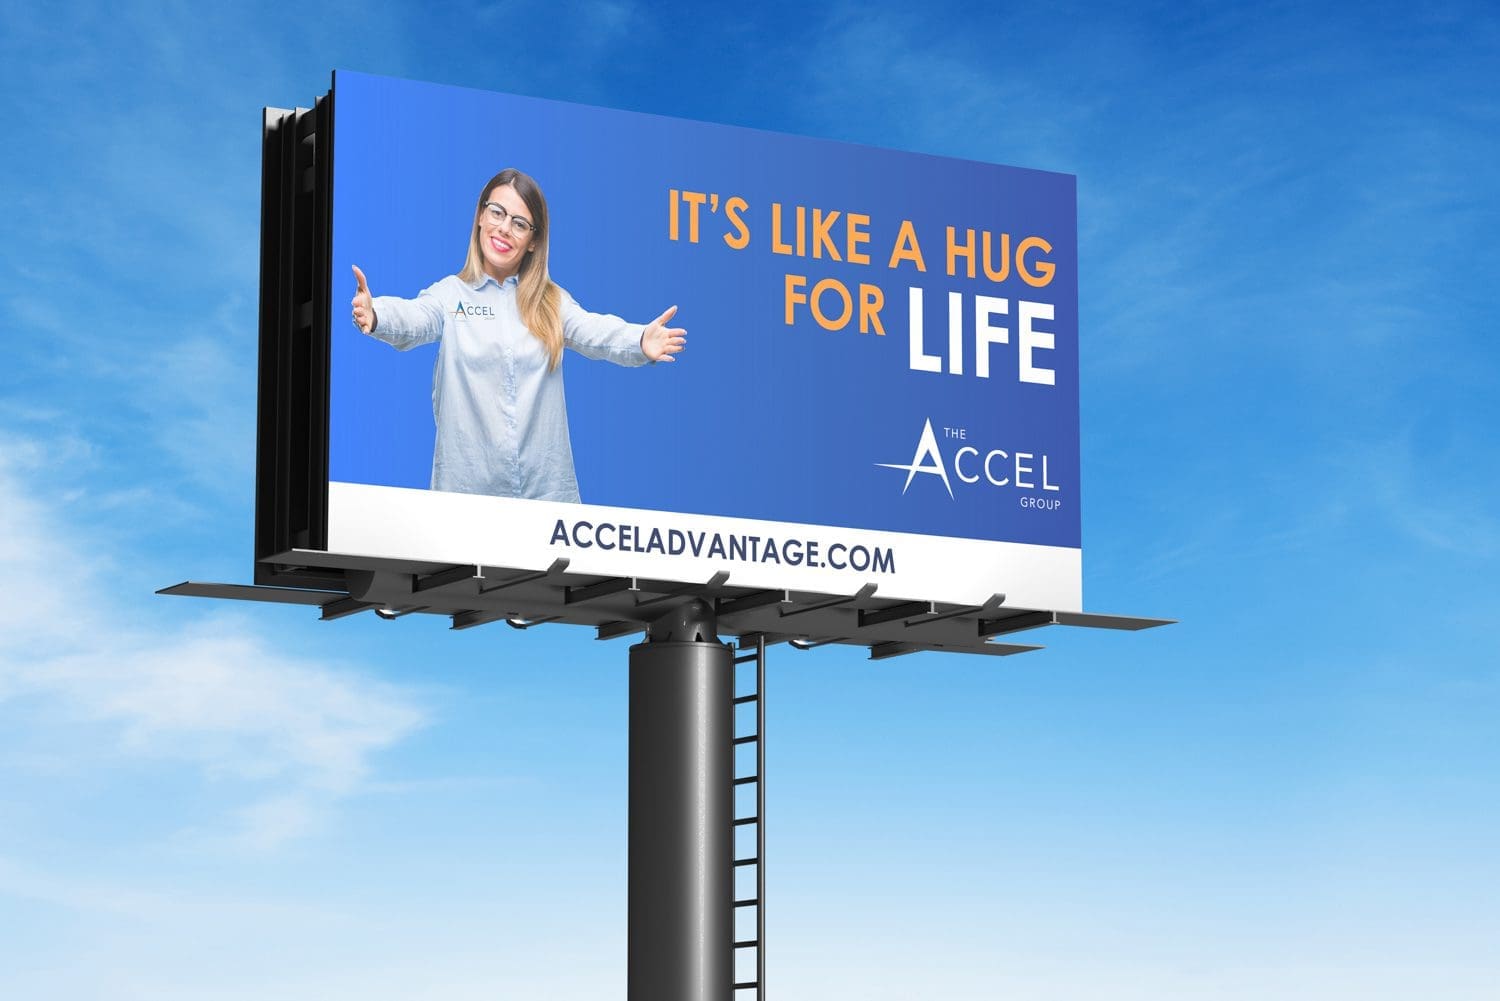 The Accel Group billboard ad